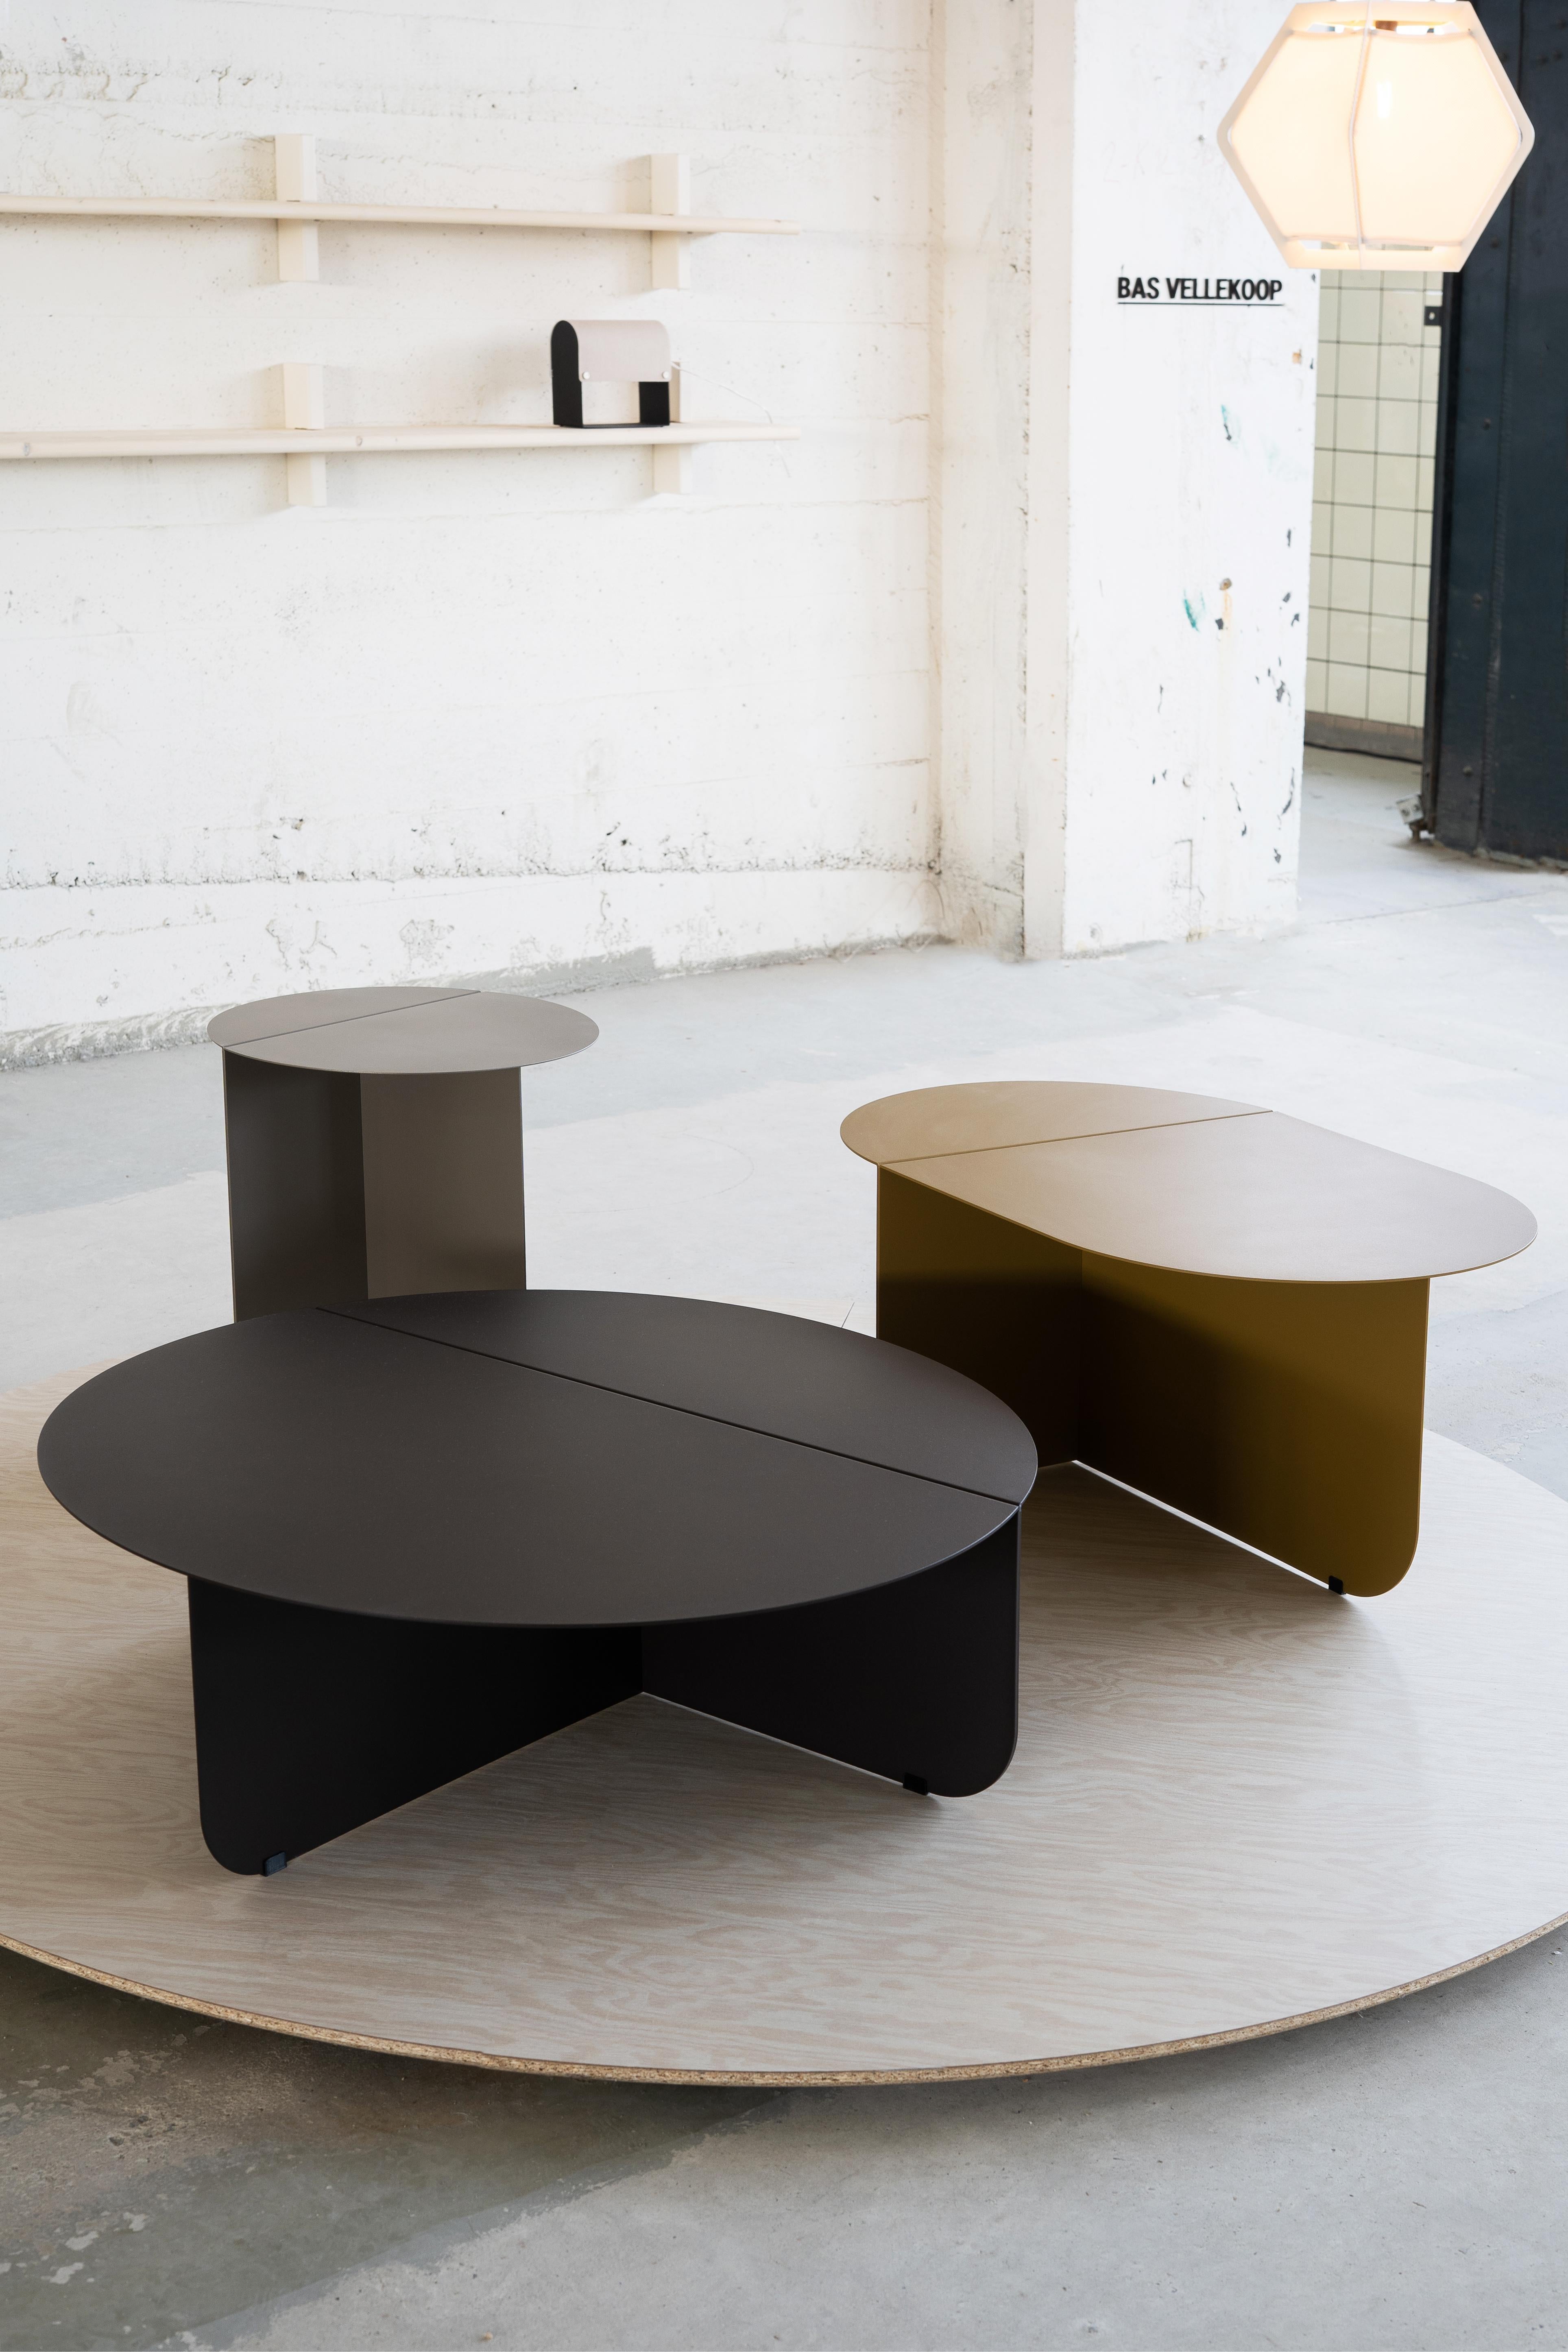 Aluminum Colour, a Modern Oval Coffee Table, Ral 1018 - Zinc Yellow, by Bas Vellekoop For Sale